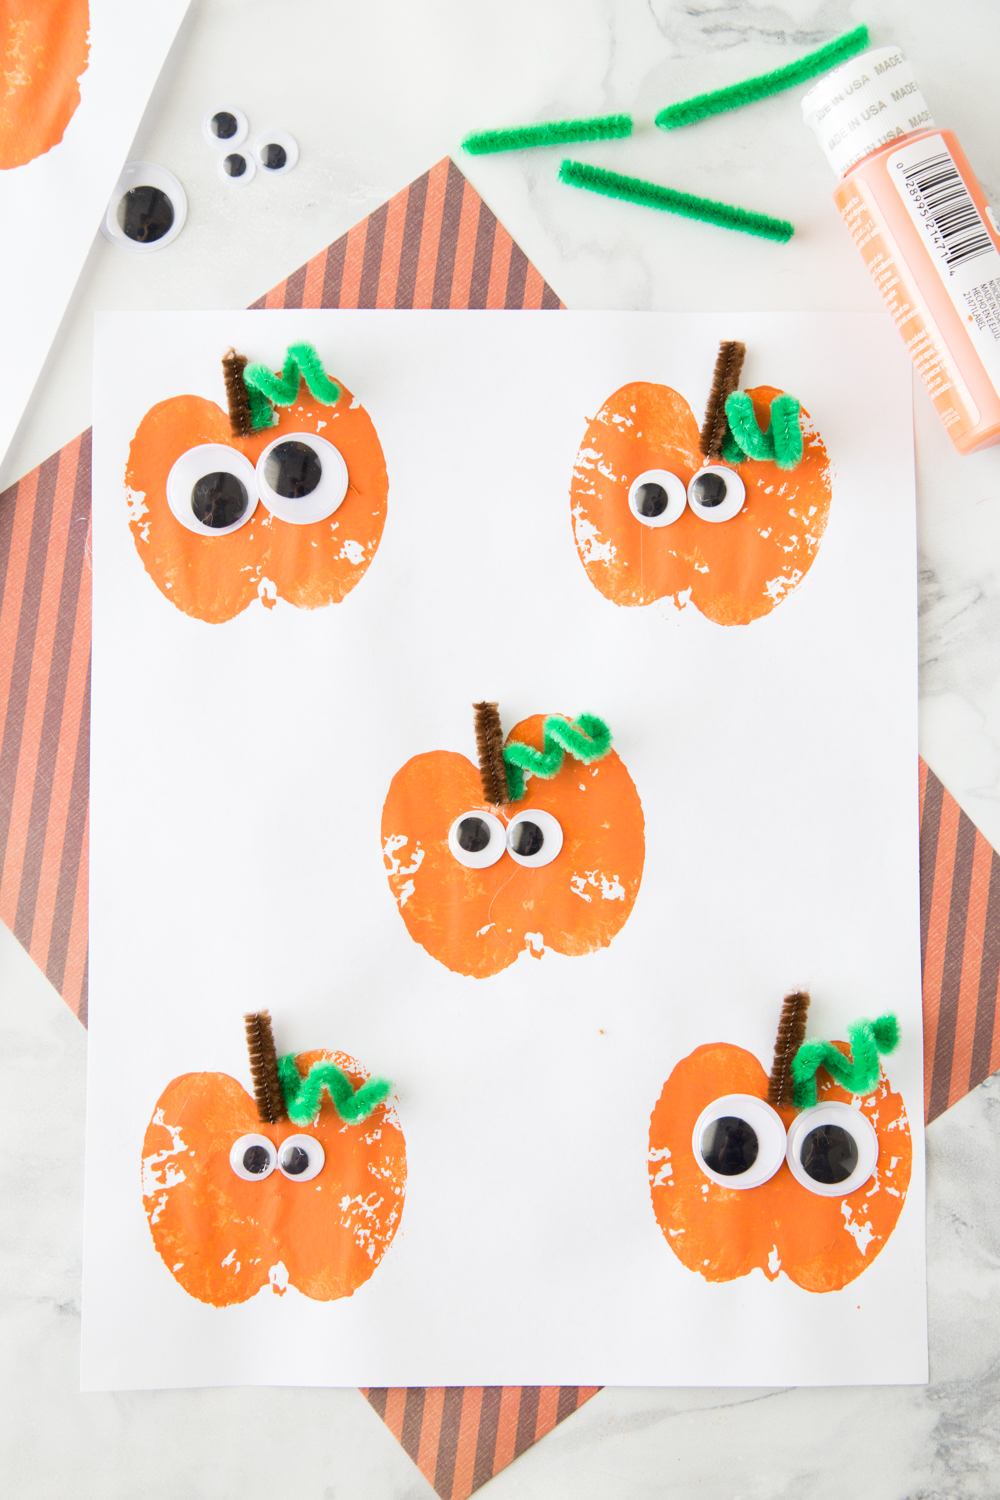 This Apple Stamping Pumpkin Craft is such a fun harvest time activity for the kids on Halloween. Try 15 more Easy Halloween craft ideas for party and decorations.